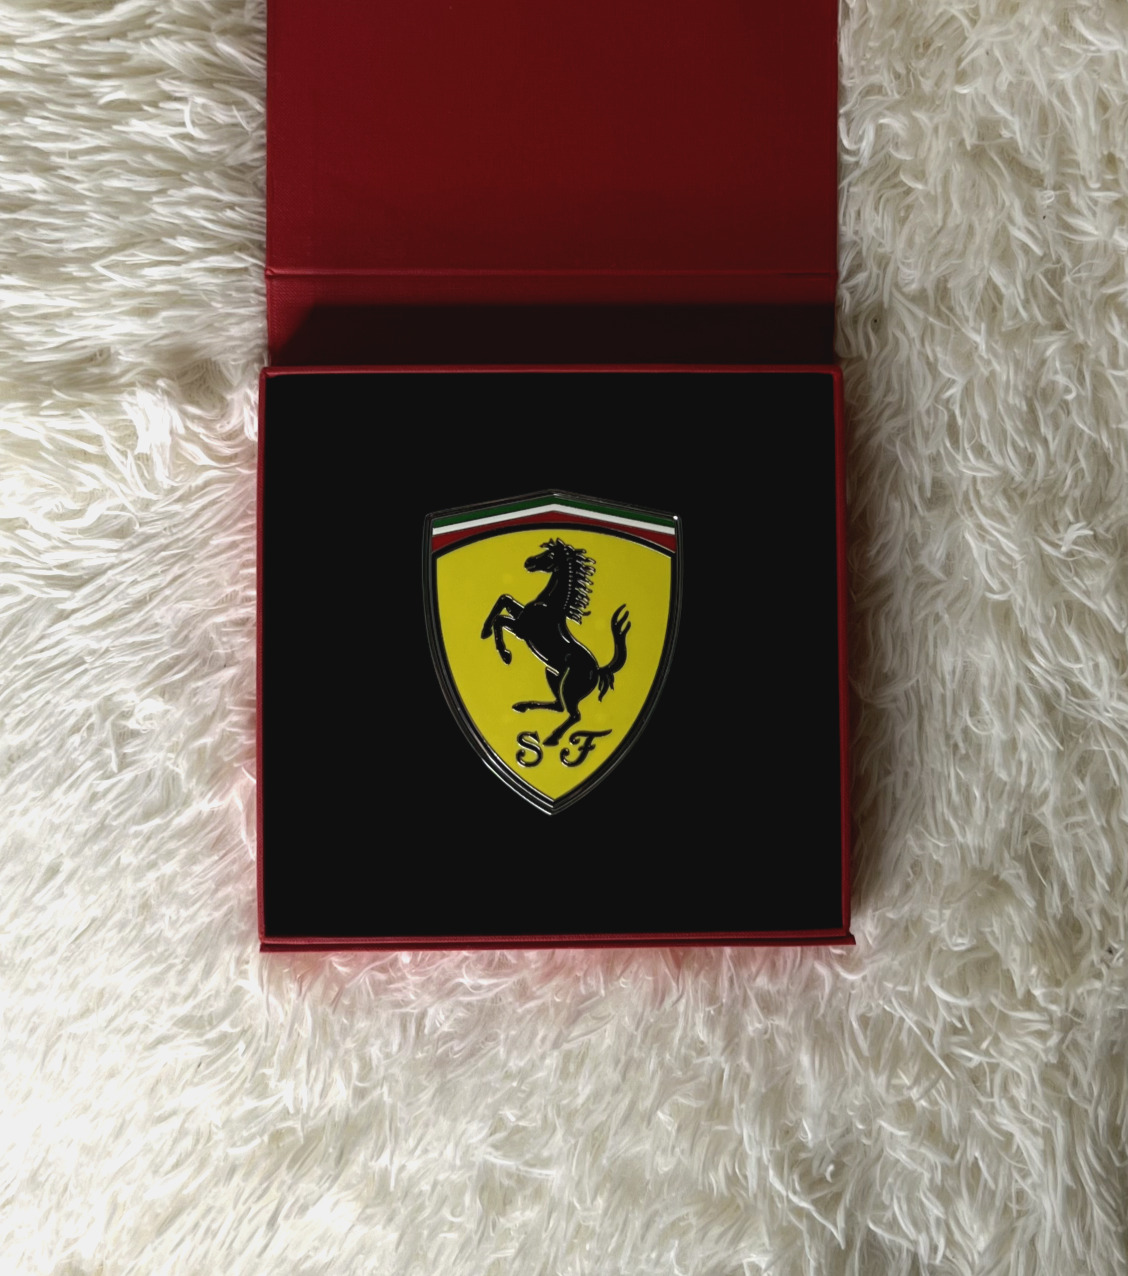 COLLECTIBLE Ferrari Emblem Enameled Alloy Paperweight | Brand New With Box 